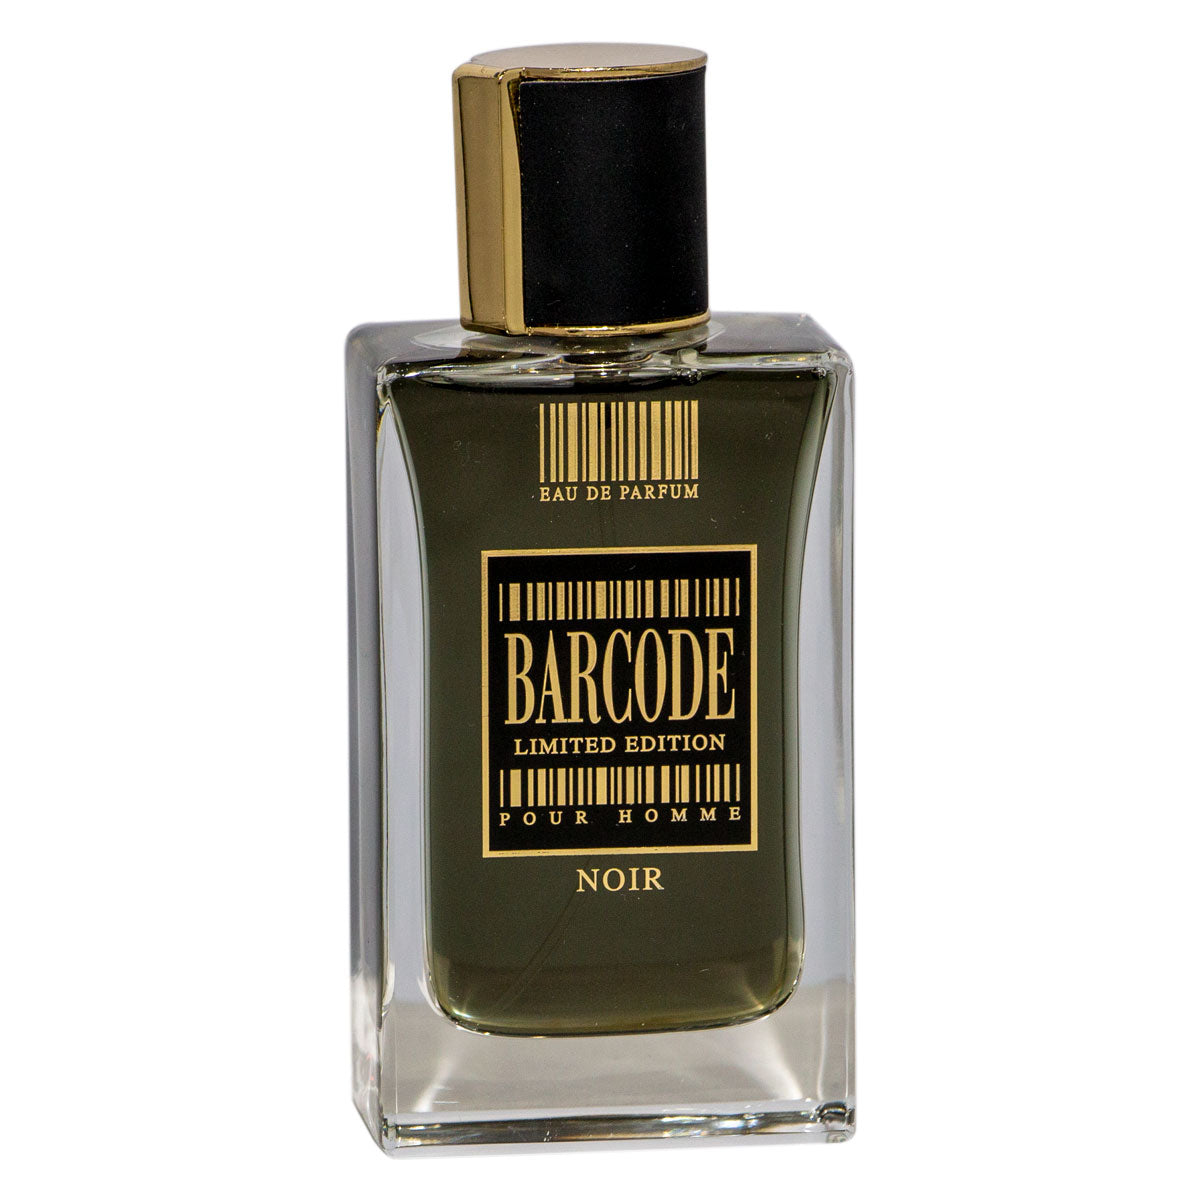 Barcode Limited Edition Pour Homme Noir for Men EDP 80ml - samawa perfumes 